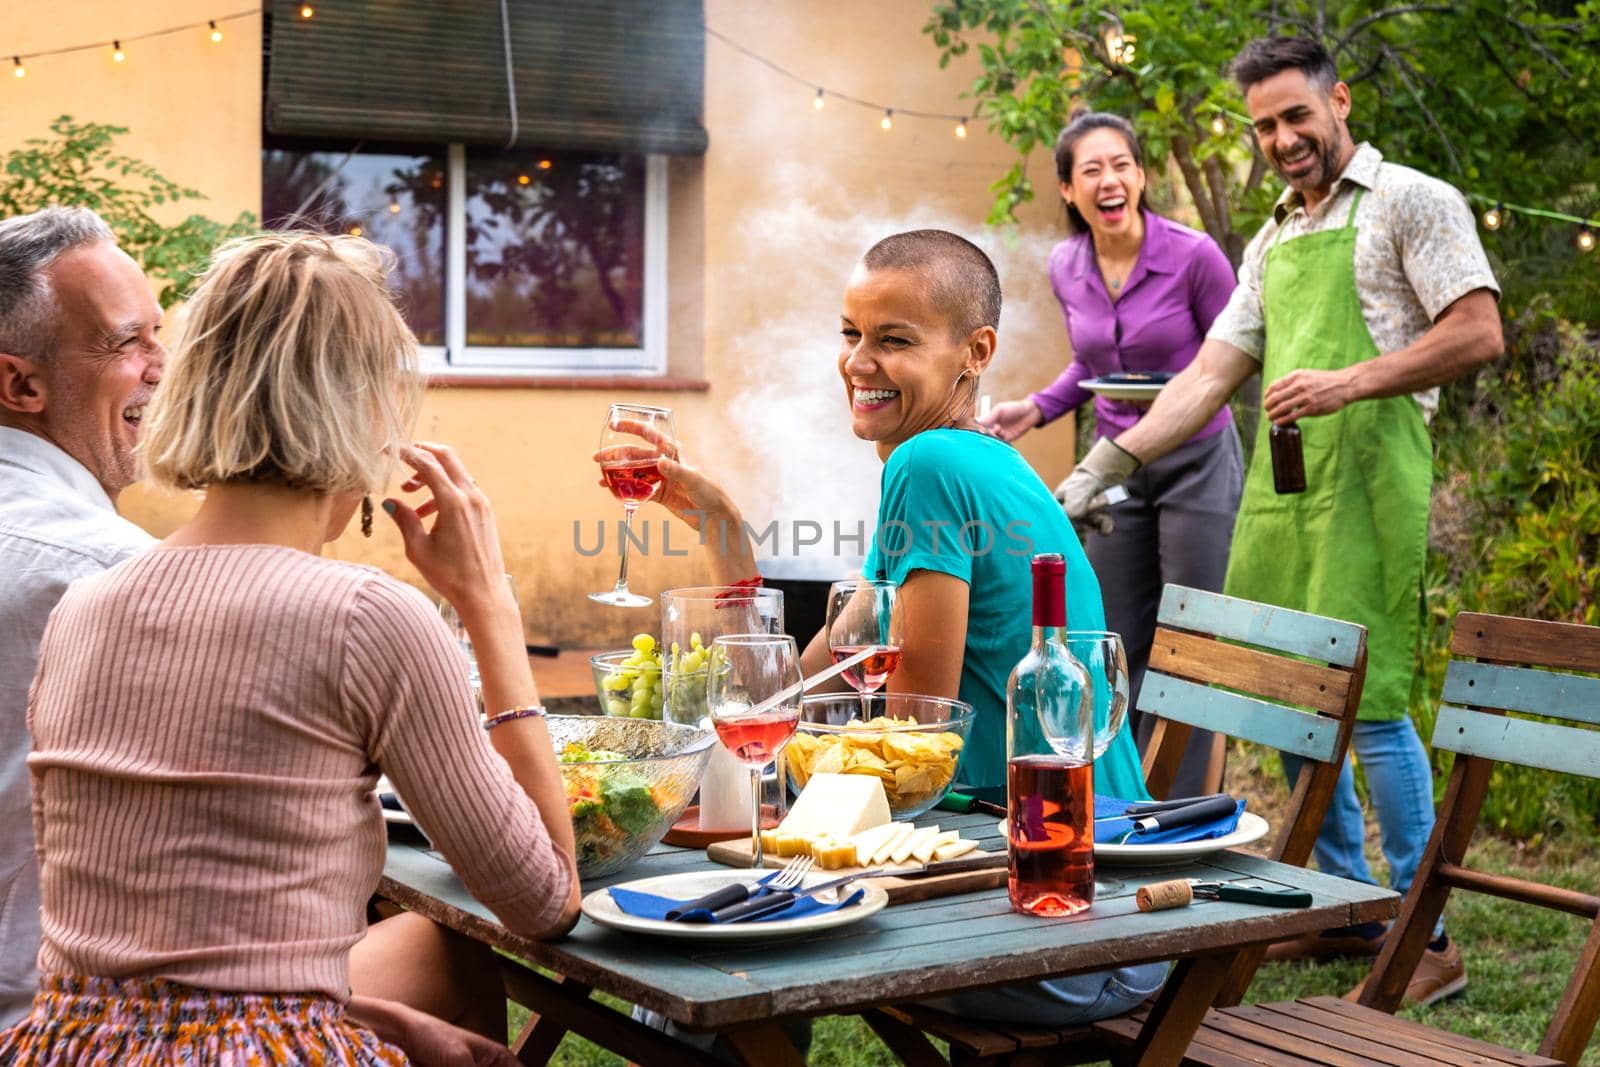 Multiracial couple cooking food on grill for friends. Outdoor garden barbecue party. Friends laughing and having fun. by Hoverstock